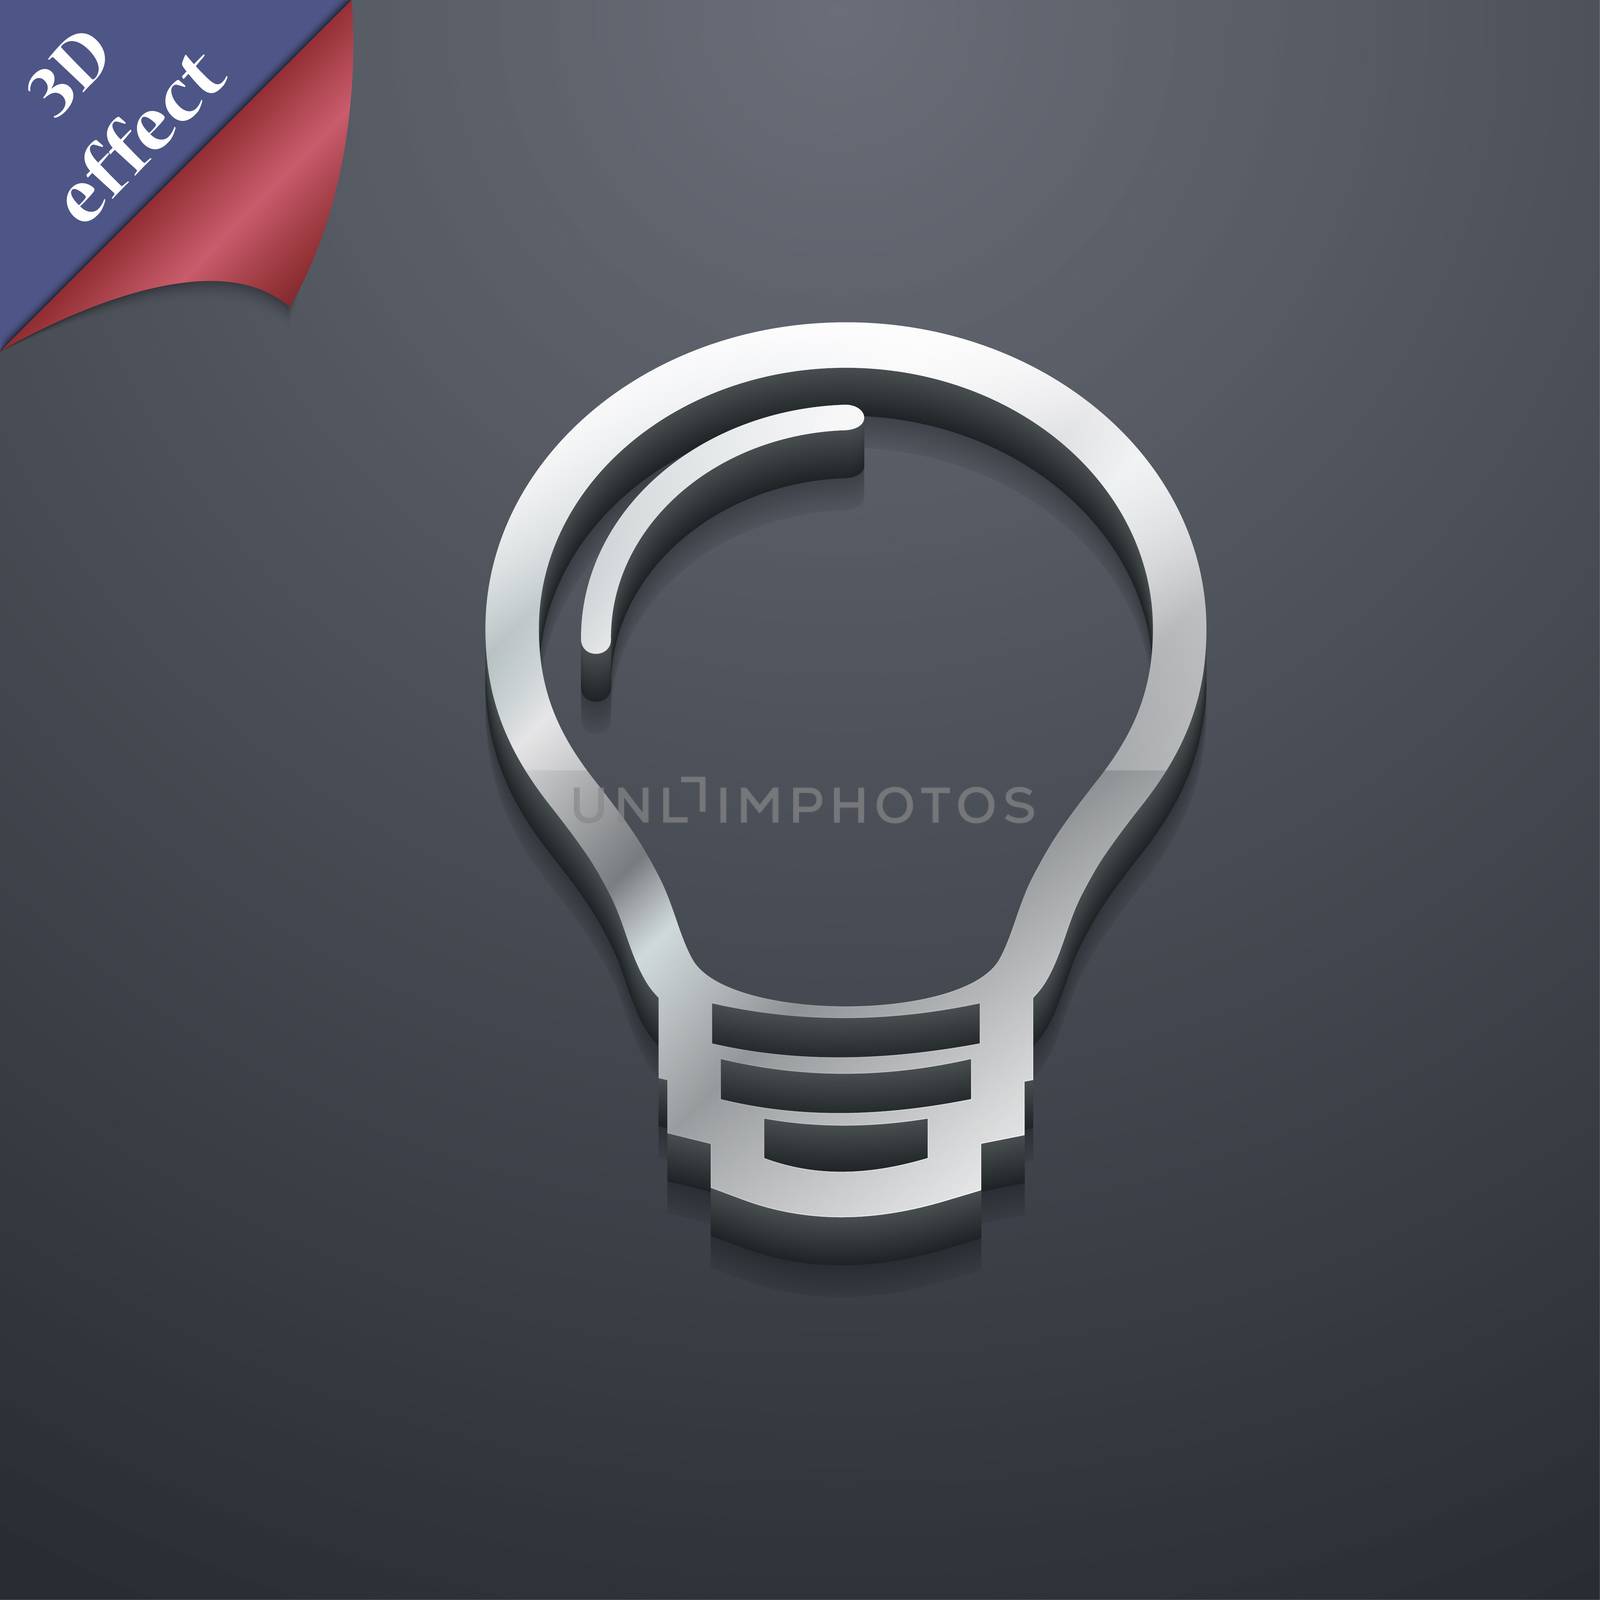 Light bulb icon symbol. 3D style. Trendy, modern design with space for your text illustration. Rastrized copy